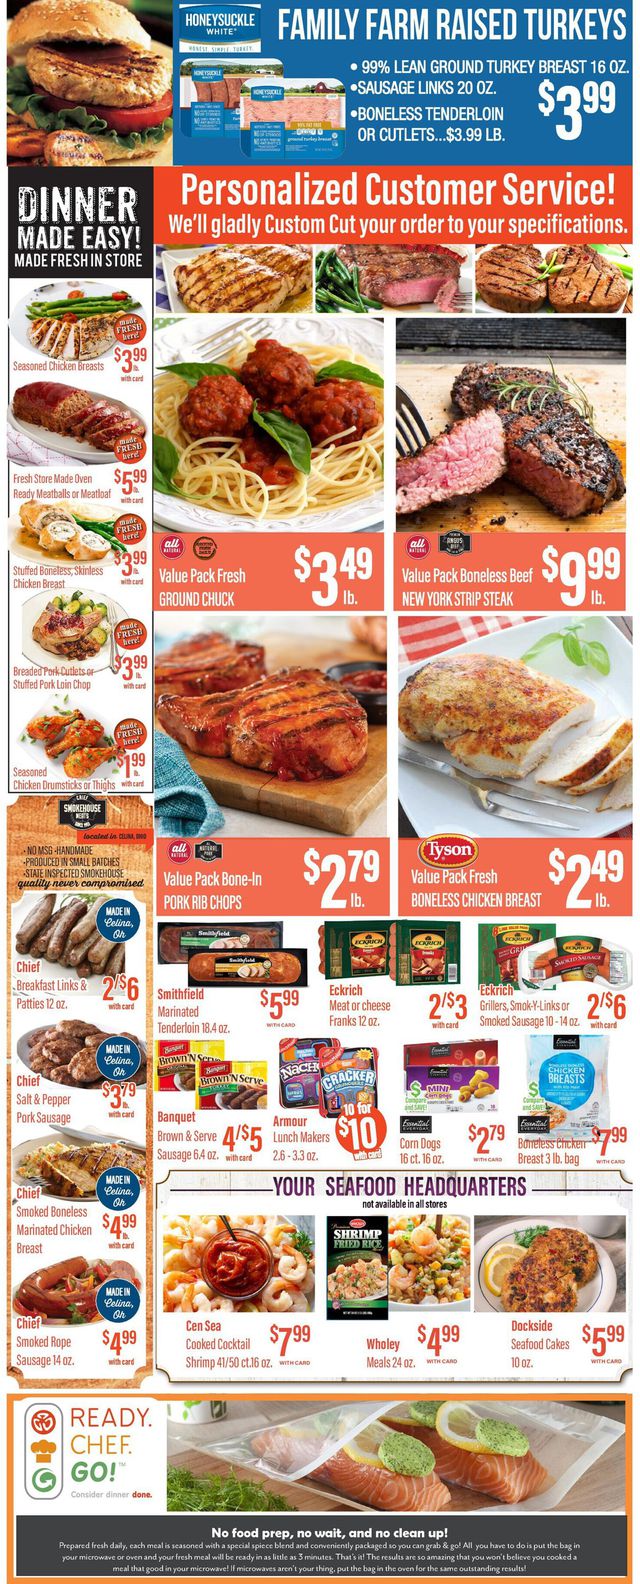 Remke Markets Ad from 01/07/2021